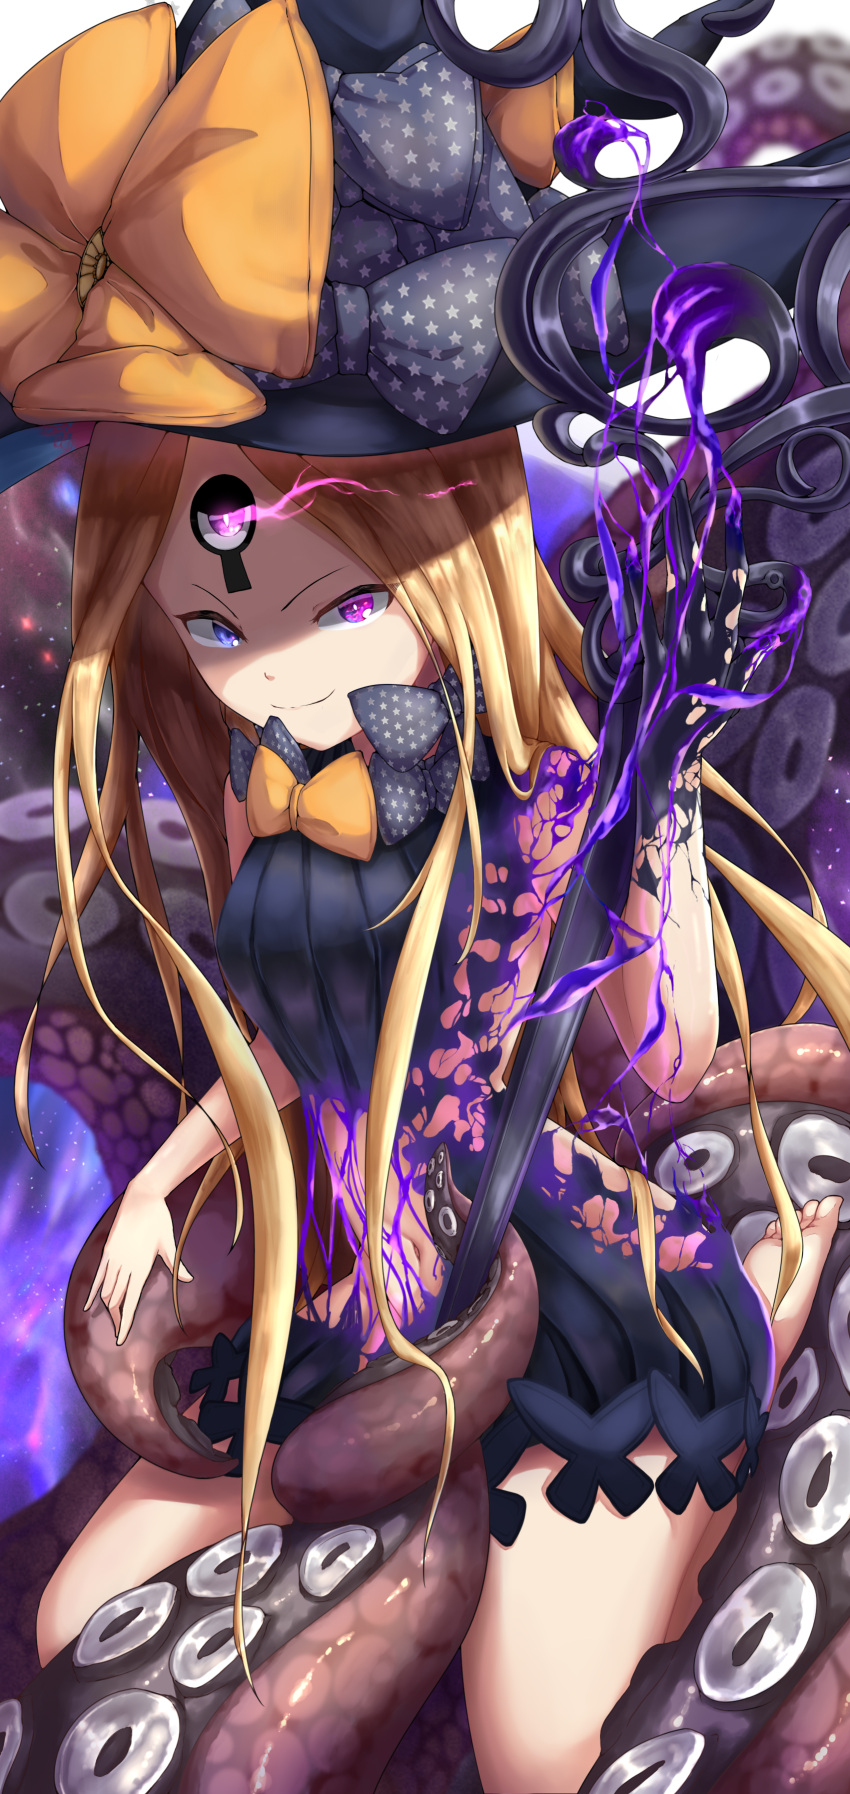 1girl abigail_williams_(fate/grand_order) absurdres black_bow black_dress blonde_hair bow commentary_request corruption dress evil_smile fate/grand_order fate_(series) heterochromia highres keyhole long_hair looking_at_viewer navel nine7284 orange_bow polka_dot polka_dot_bow smile solo space tentacles violet_eyes